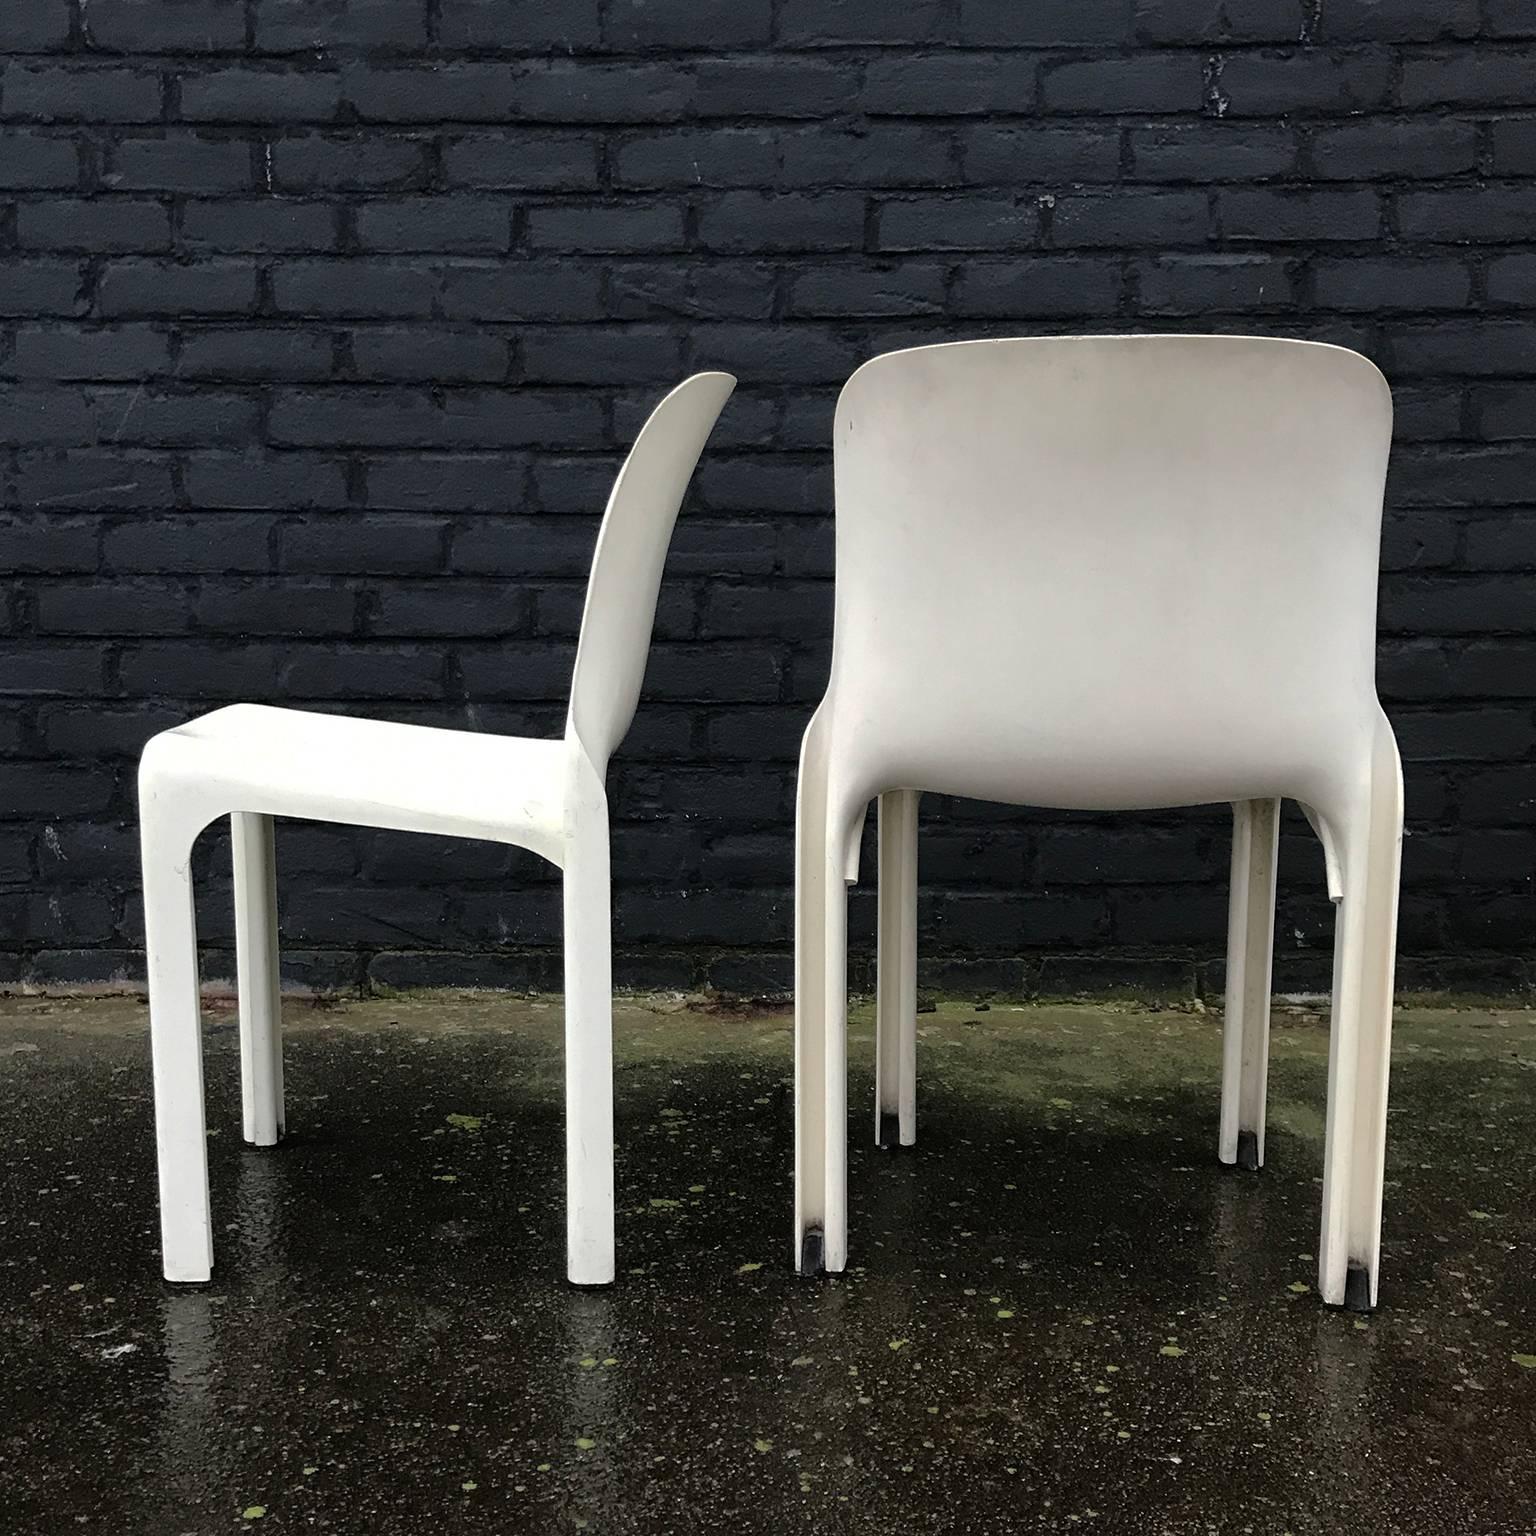 Set of four white Selene stacking chairs. The chairs have traces of wear like some stains, scratches and it seems like a bit smudgy on the backrests of some of the chairs etc. The appearance of the chairs is dull and not shiny but that might be the